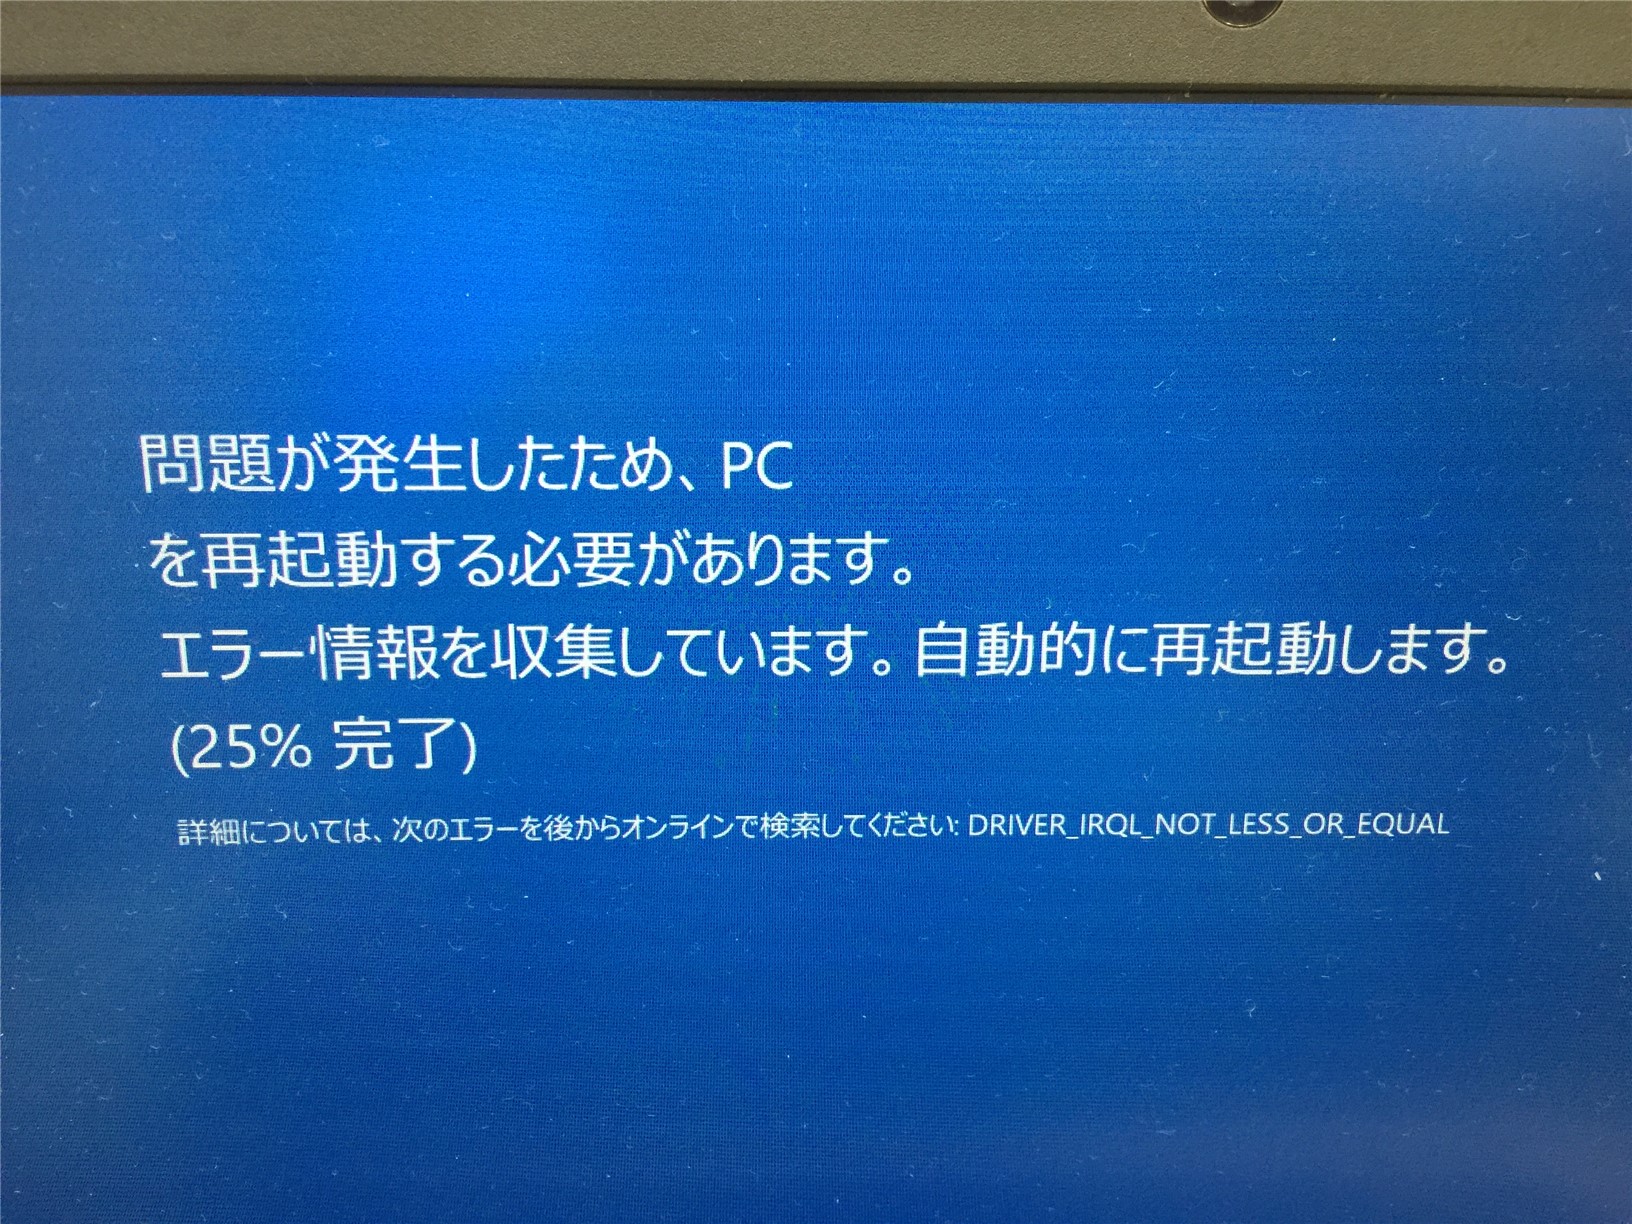 Irql not less or equal windows. Cpuz141_x64.sys Blue Screen.